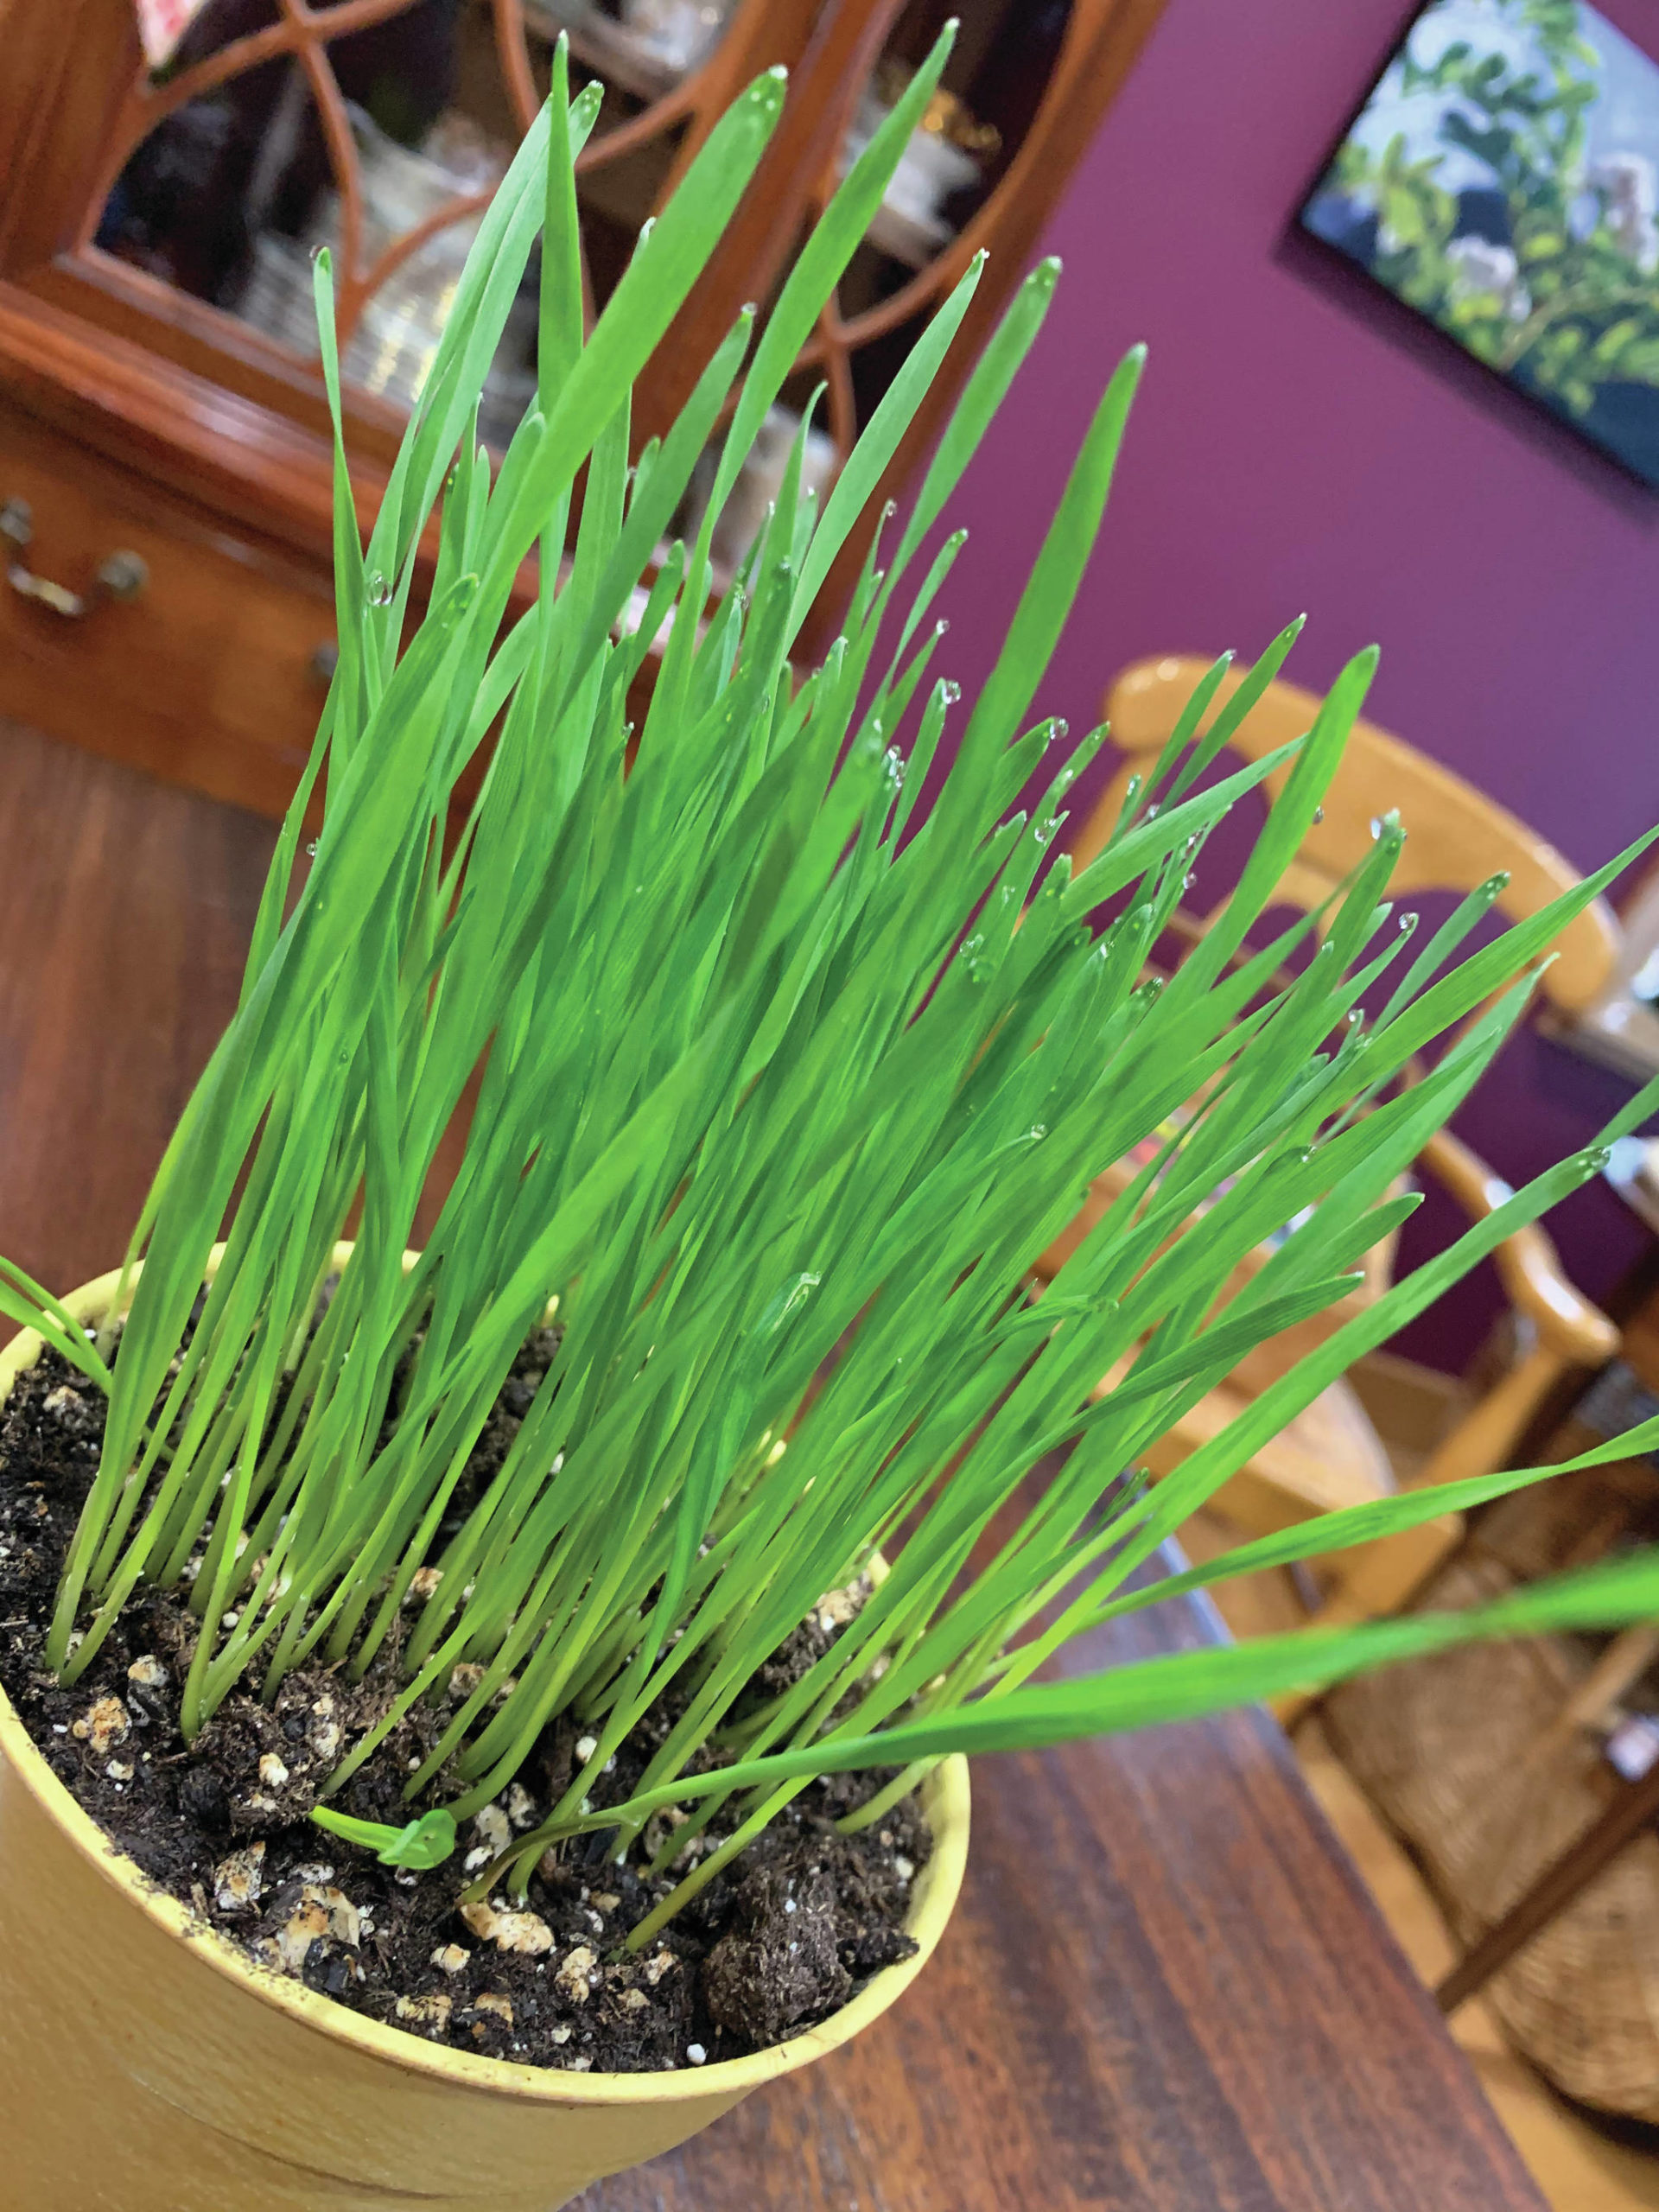 Wheat grass offers a bright spot of green in an otherwise very snowy March on March 5, 2021, in the Kachemak Gardener’s home in Homer, Alaska. (Photo by Rosemary Fitzpatrick)